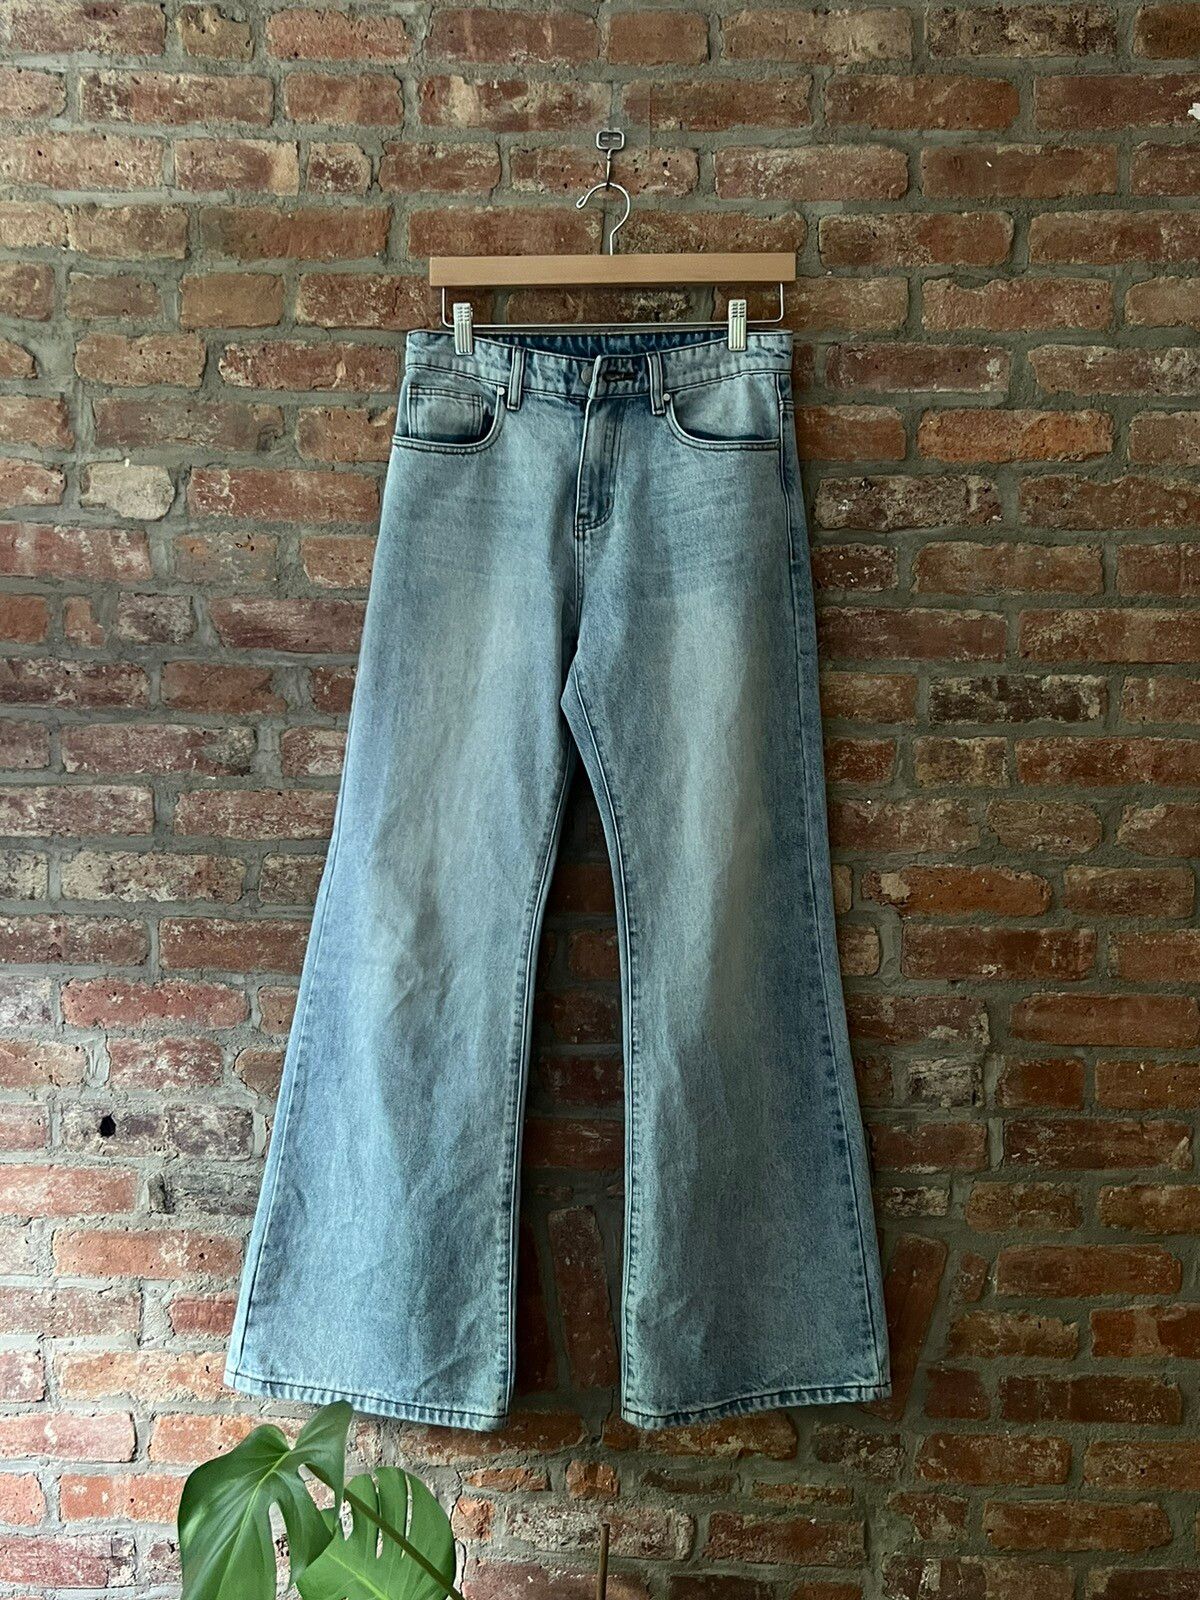 basketcase gallery Basketcase Gallery LAX flare jeans Size US 30 / EU 46 - 2 Preview